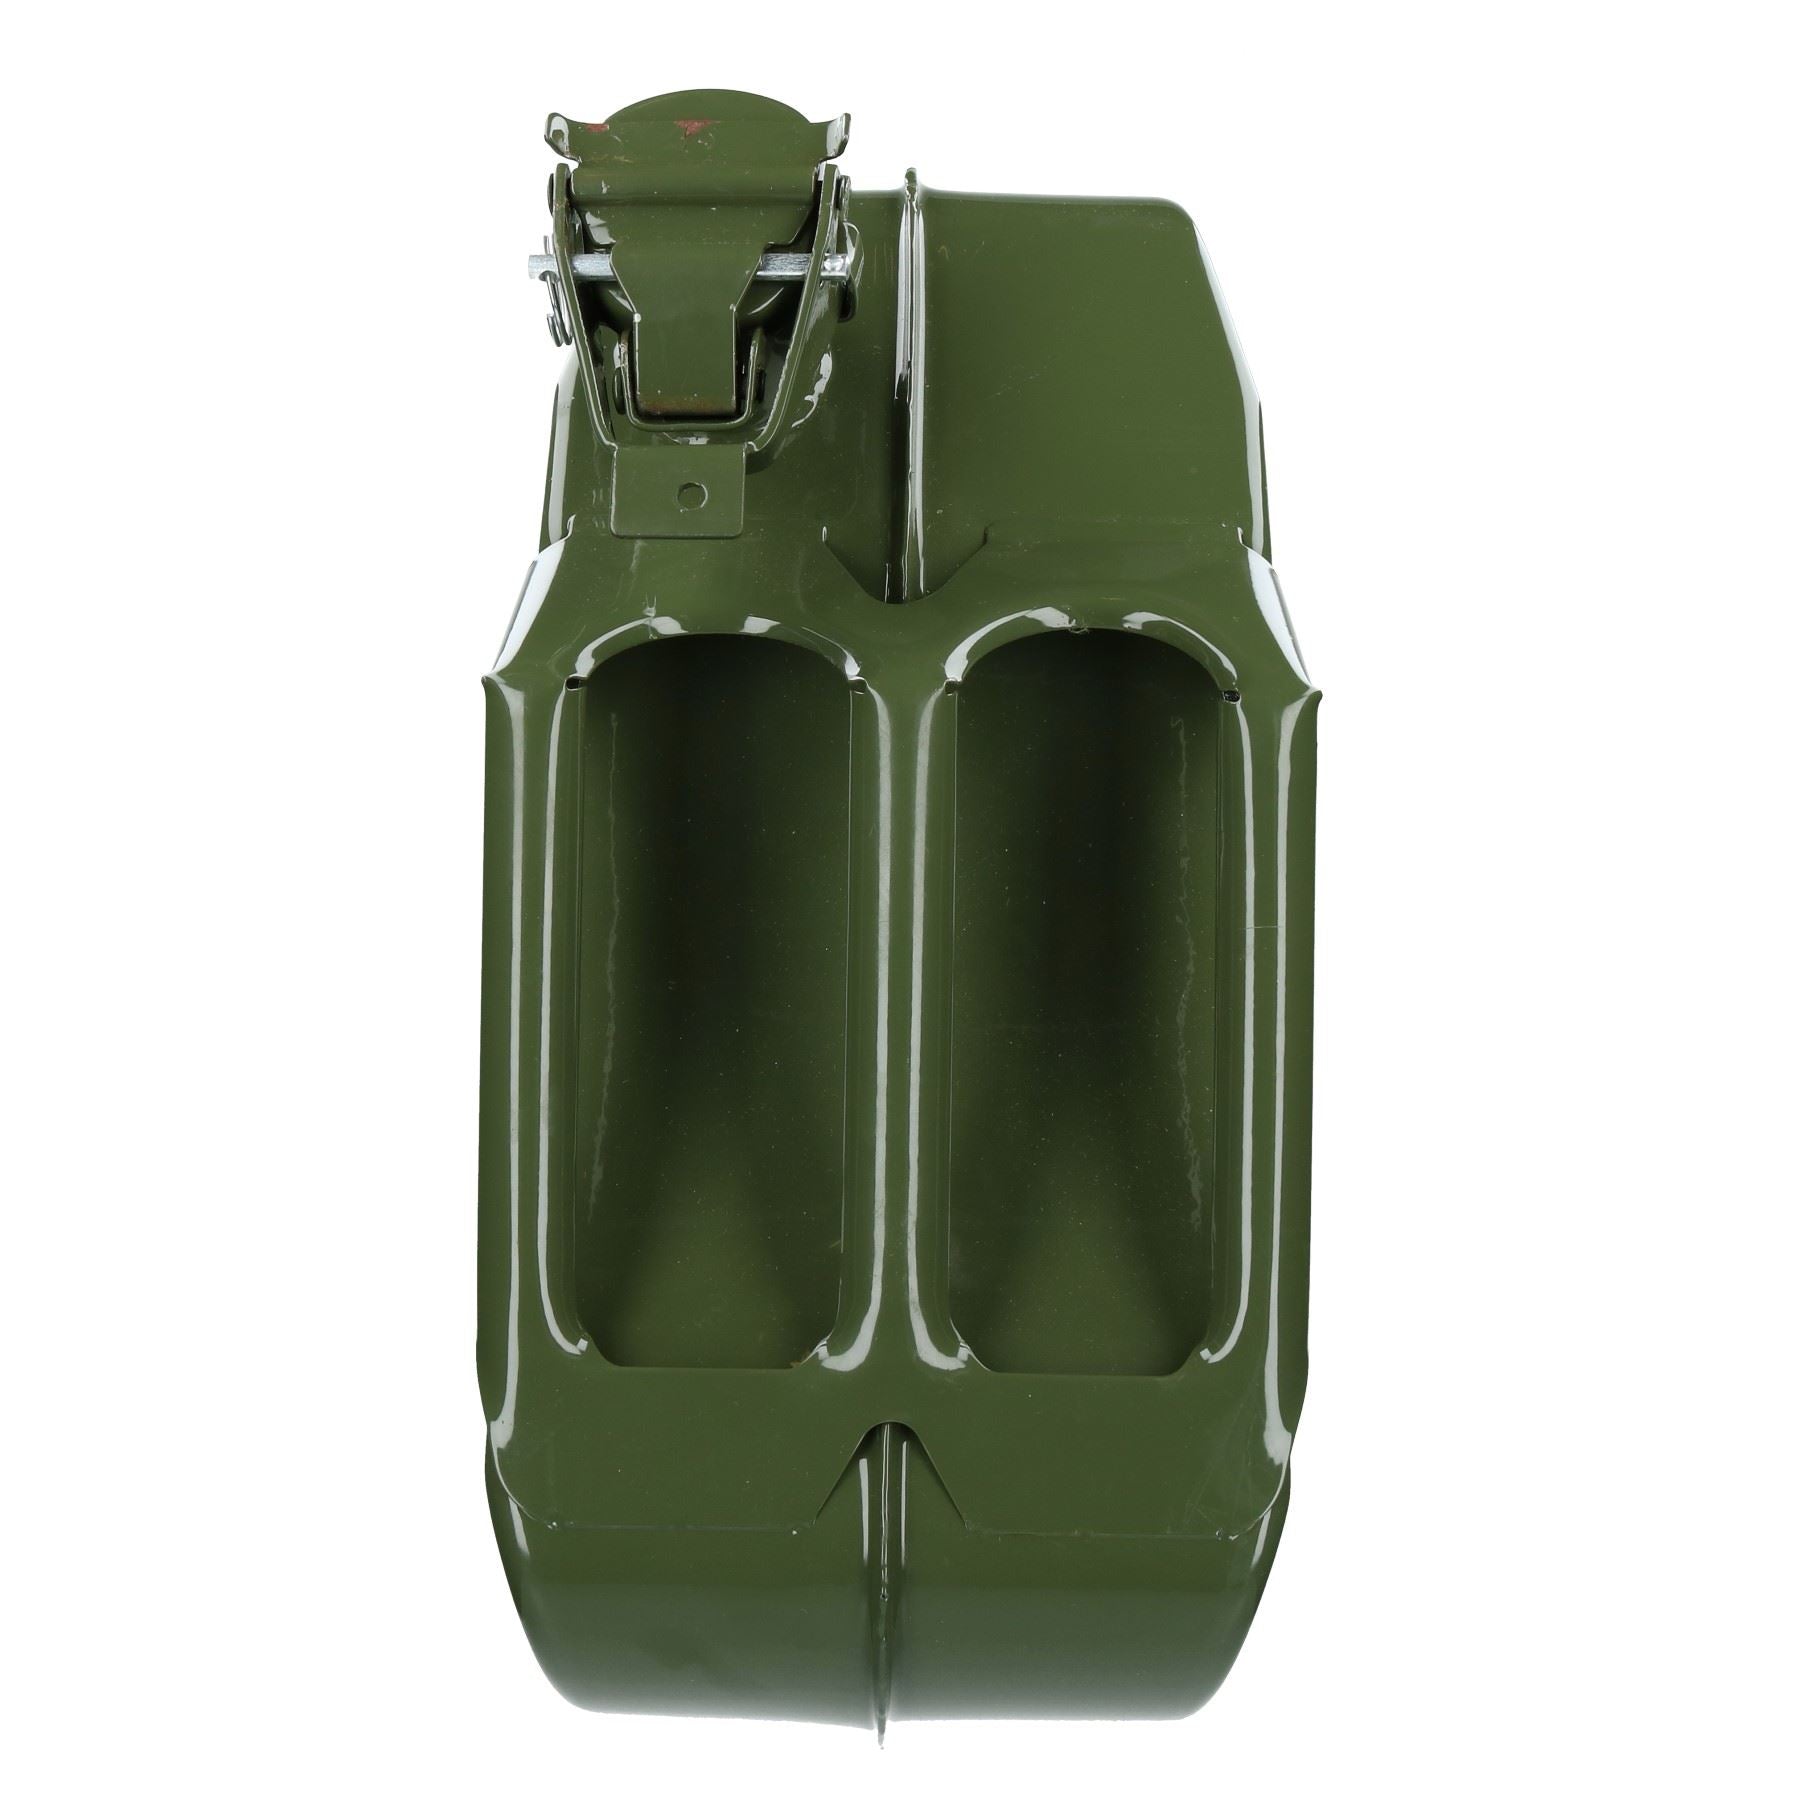 20 Litres Metal Fuel Jerry Can Holder Storage for Petrol Diesel Oil Container